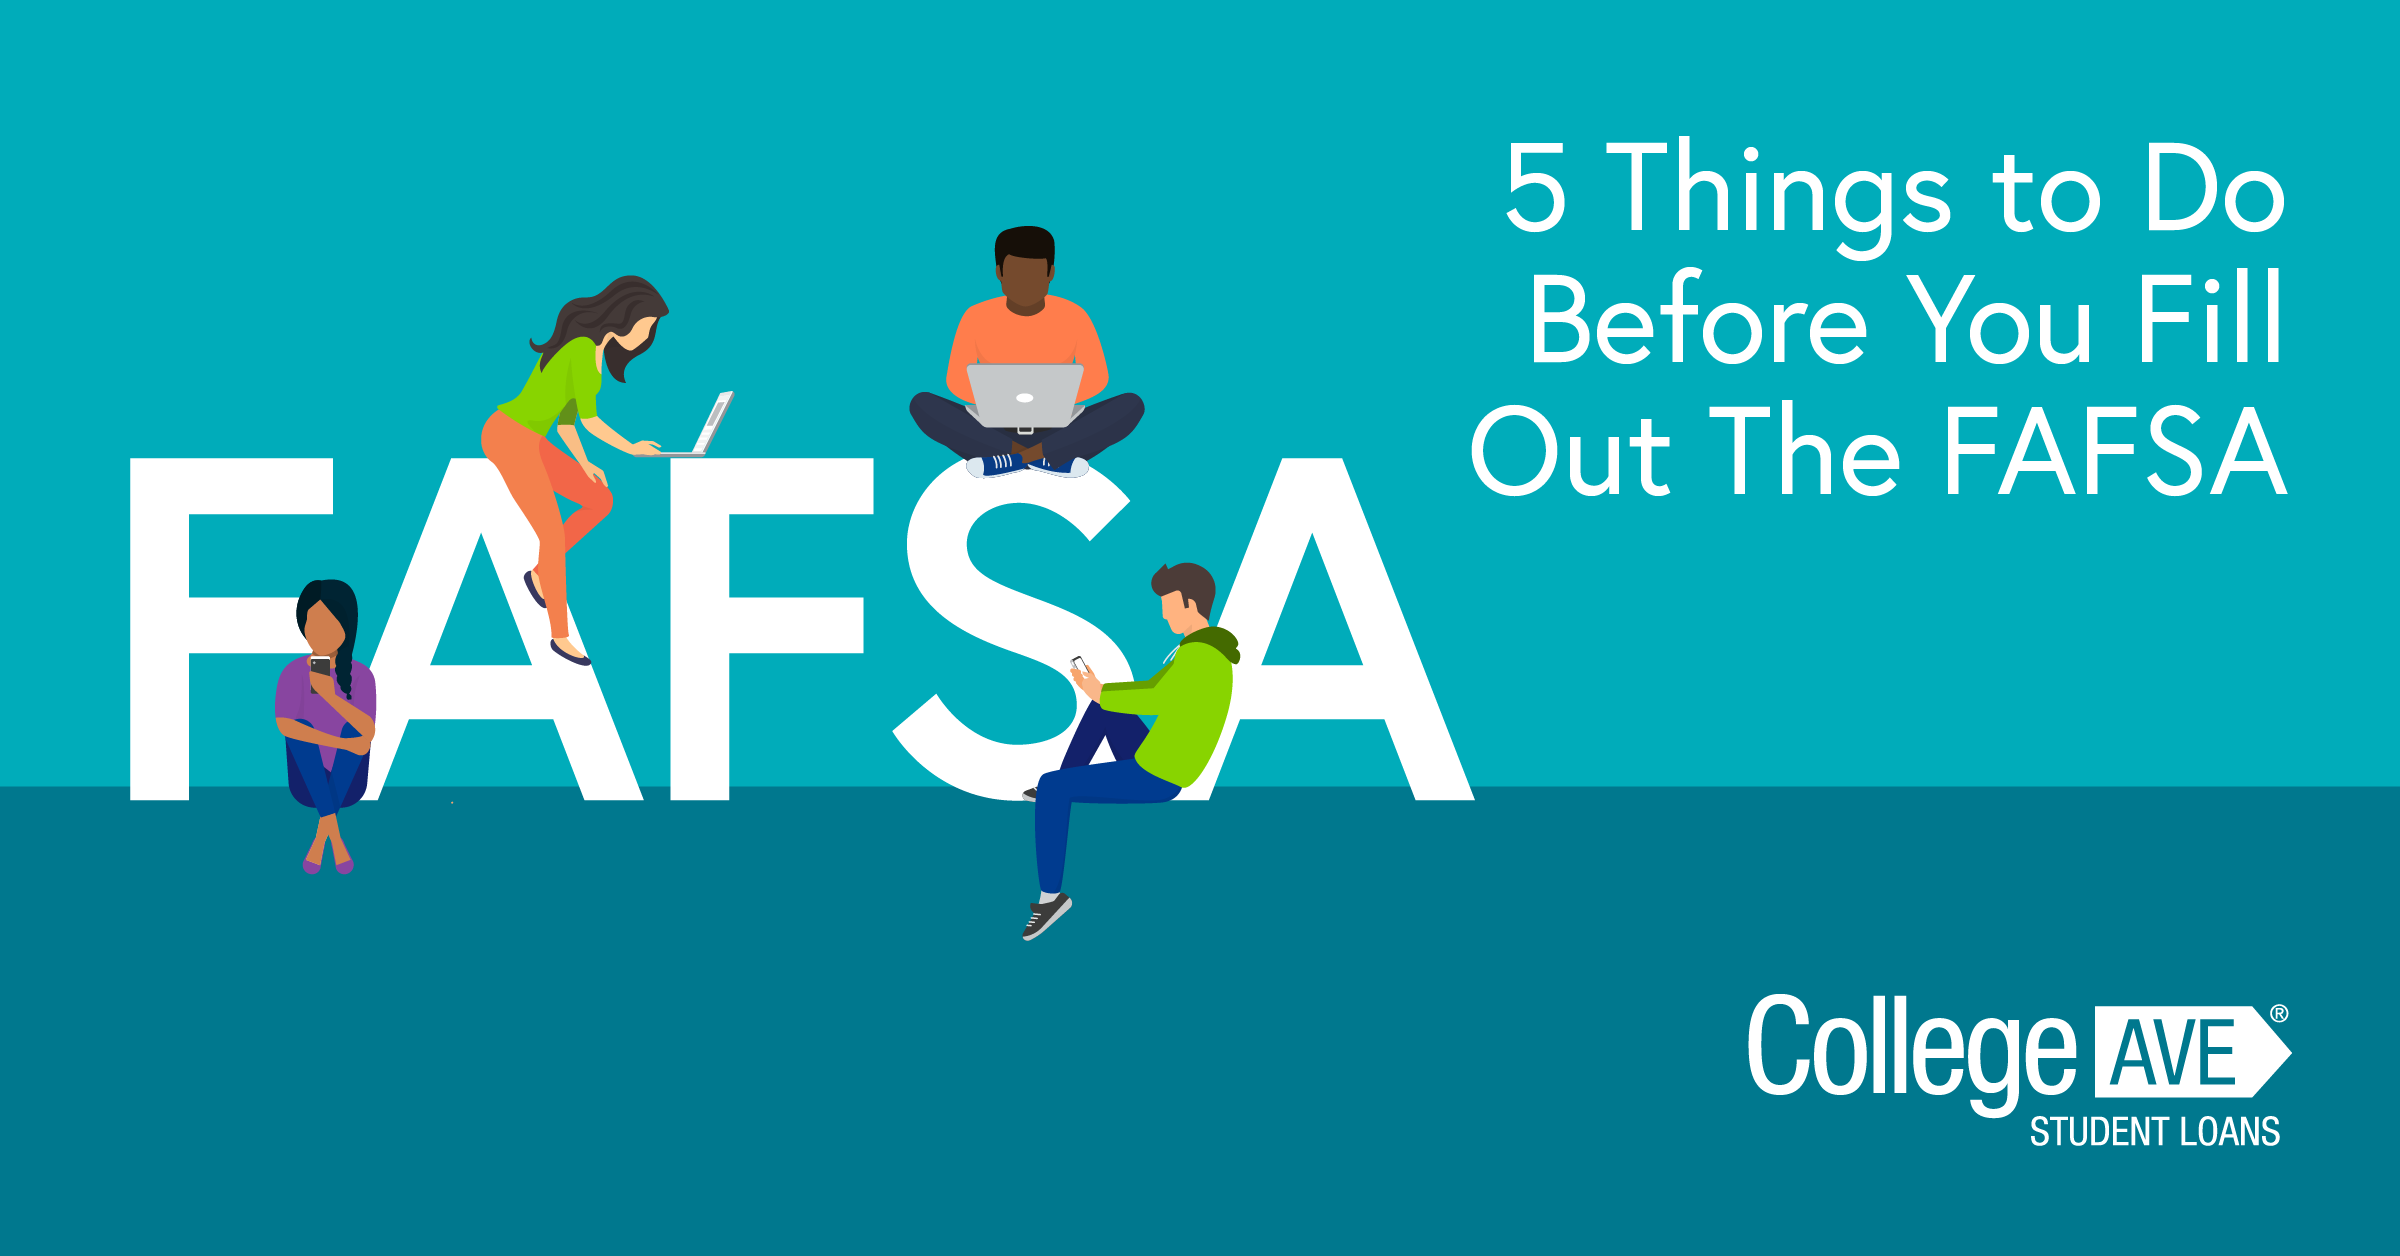 5 Things to Do to Prepare for the FAFSA | College Ave